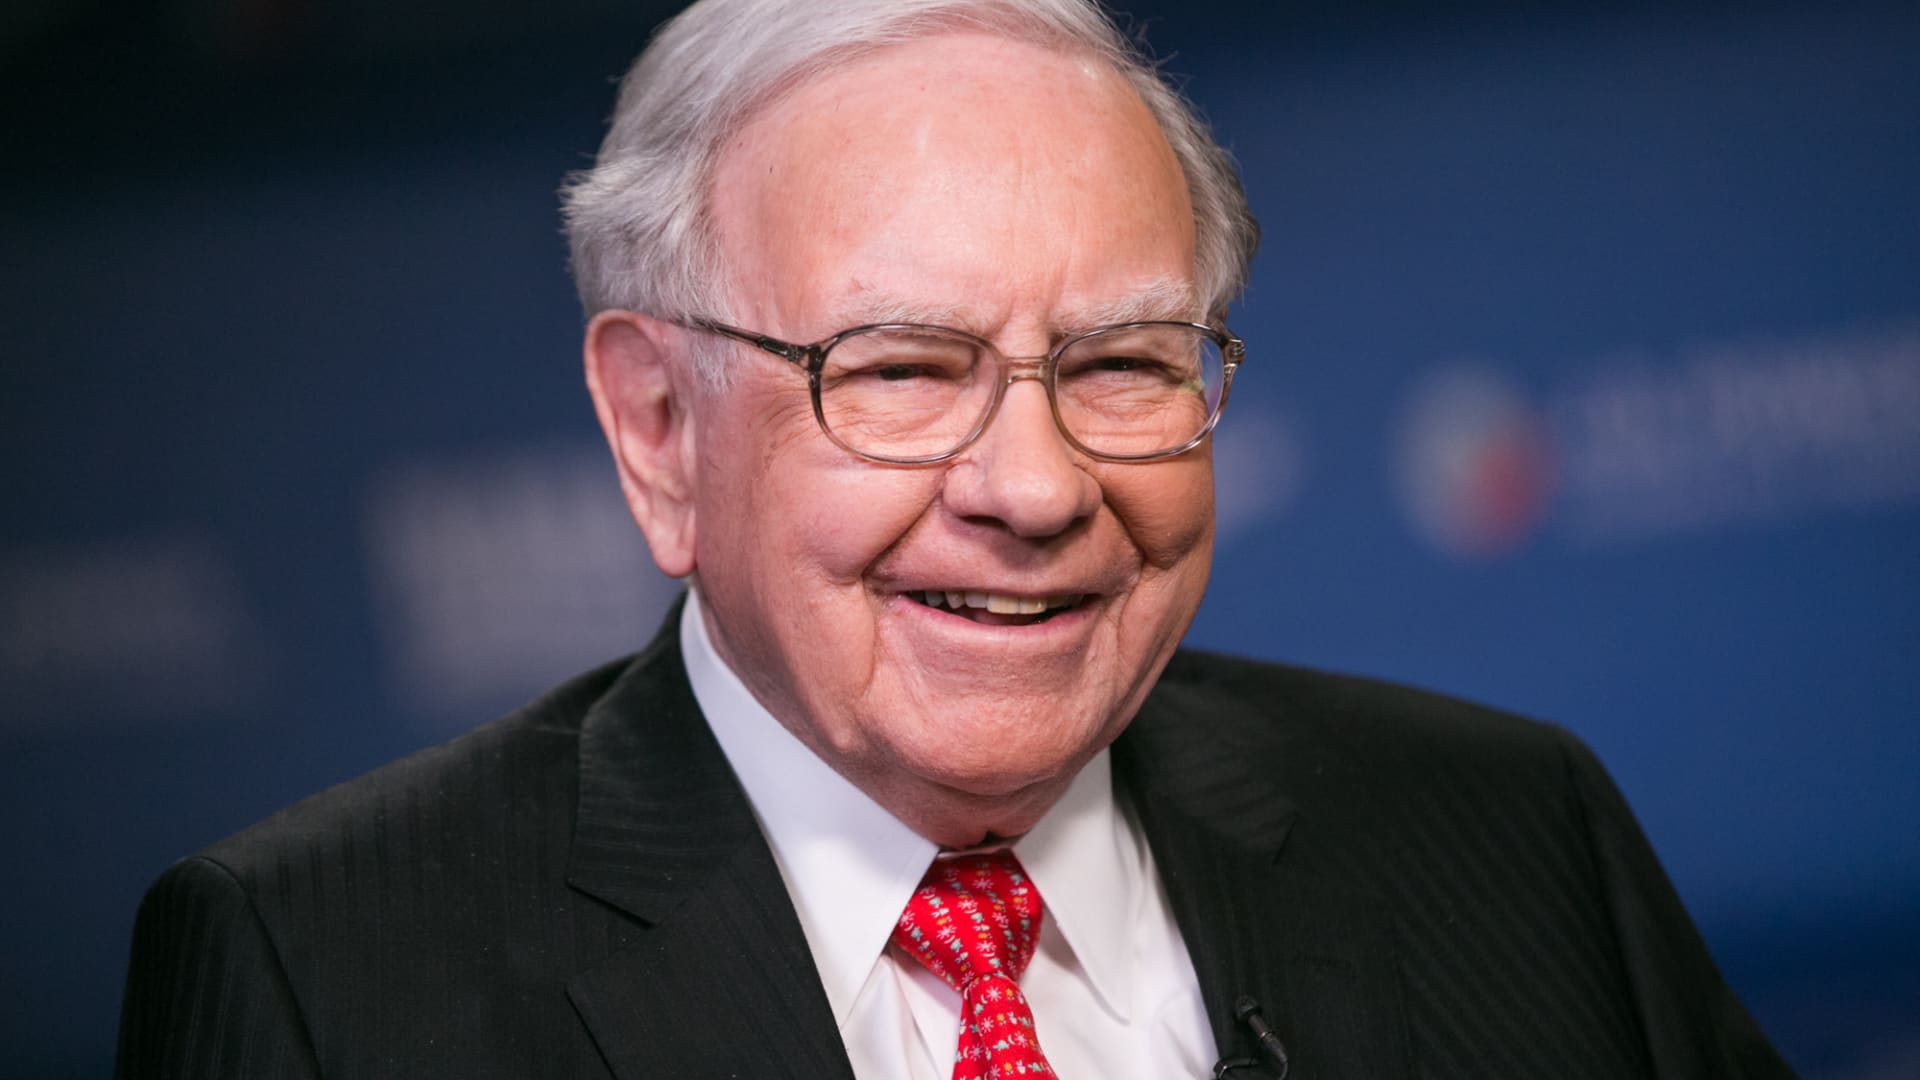 Billionaire investor Warren Buffett told CNBC on Wednesday the recent craze over bitcoin and other cryptocurrencies won't end well. "In term